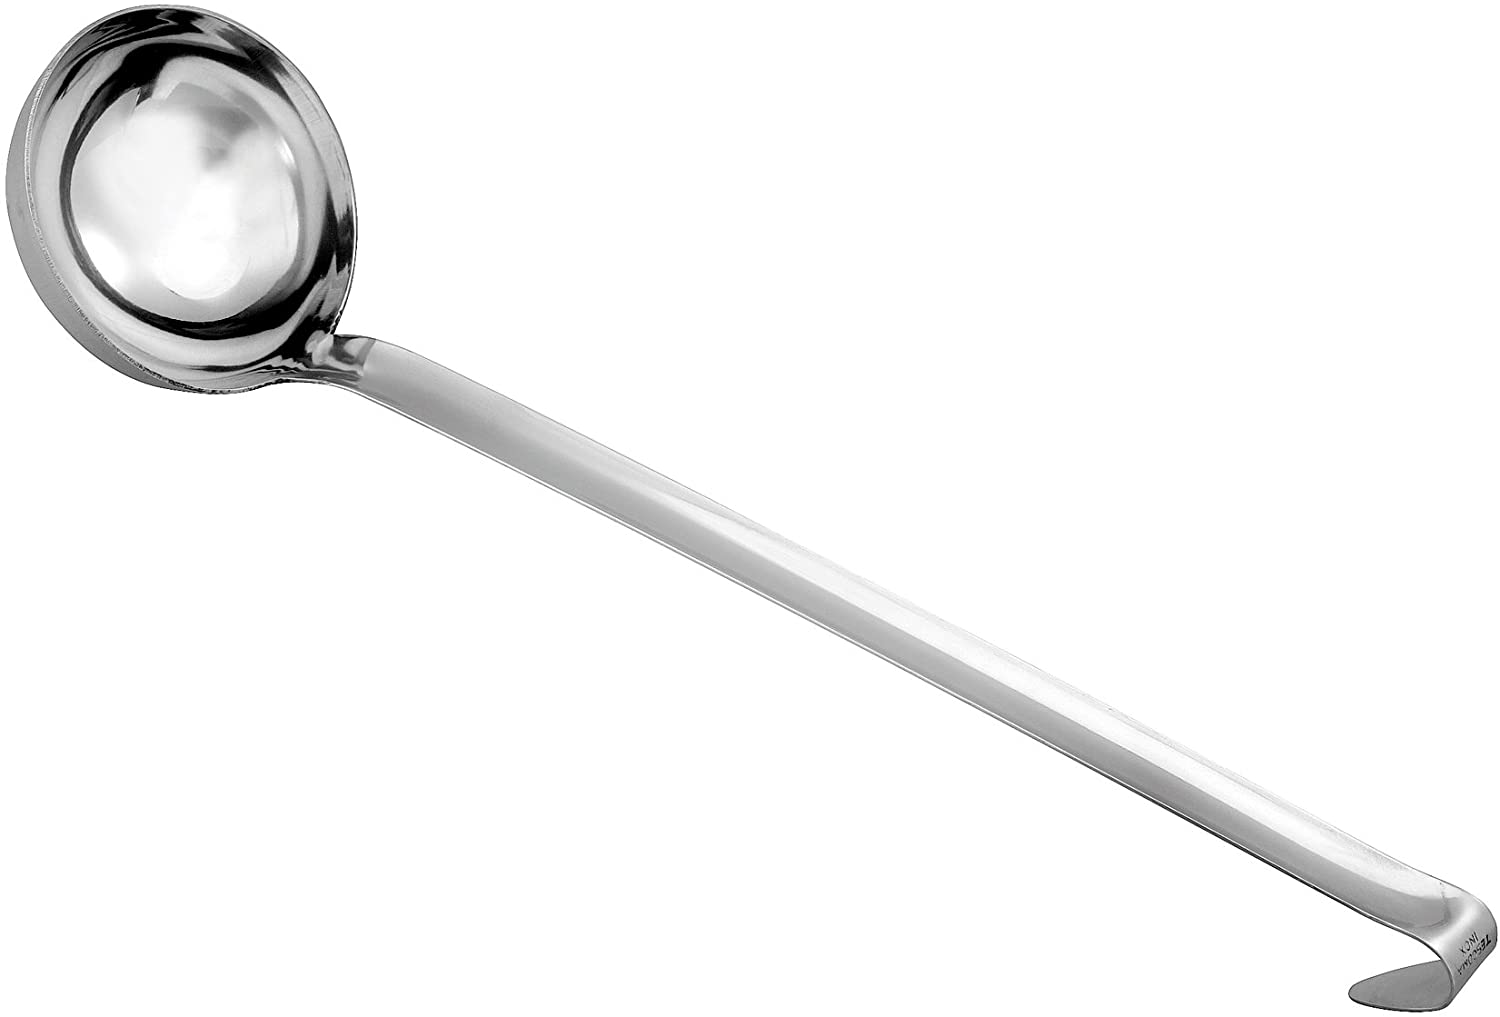 Tescoma 428316 Ladle, Stainless Steel, Grey, 38 x 9 x 8 cm